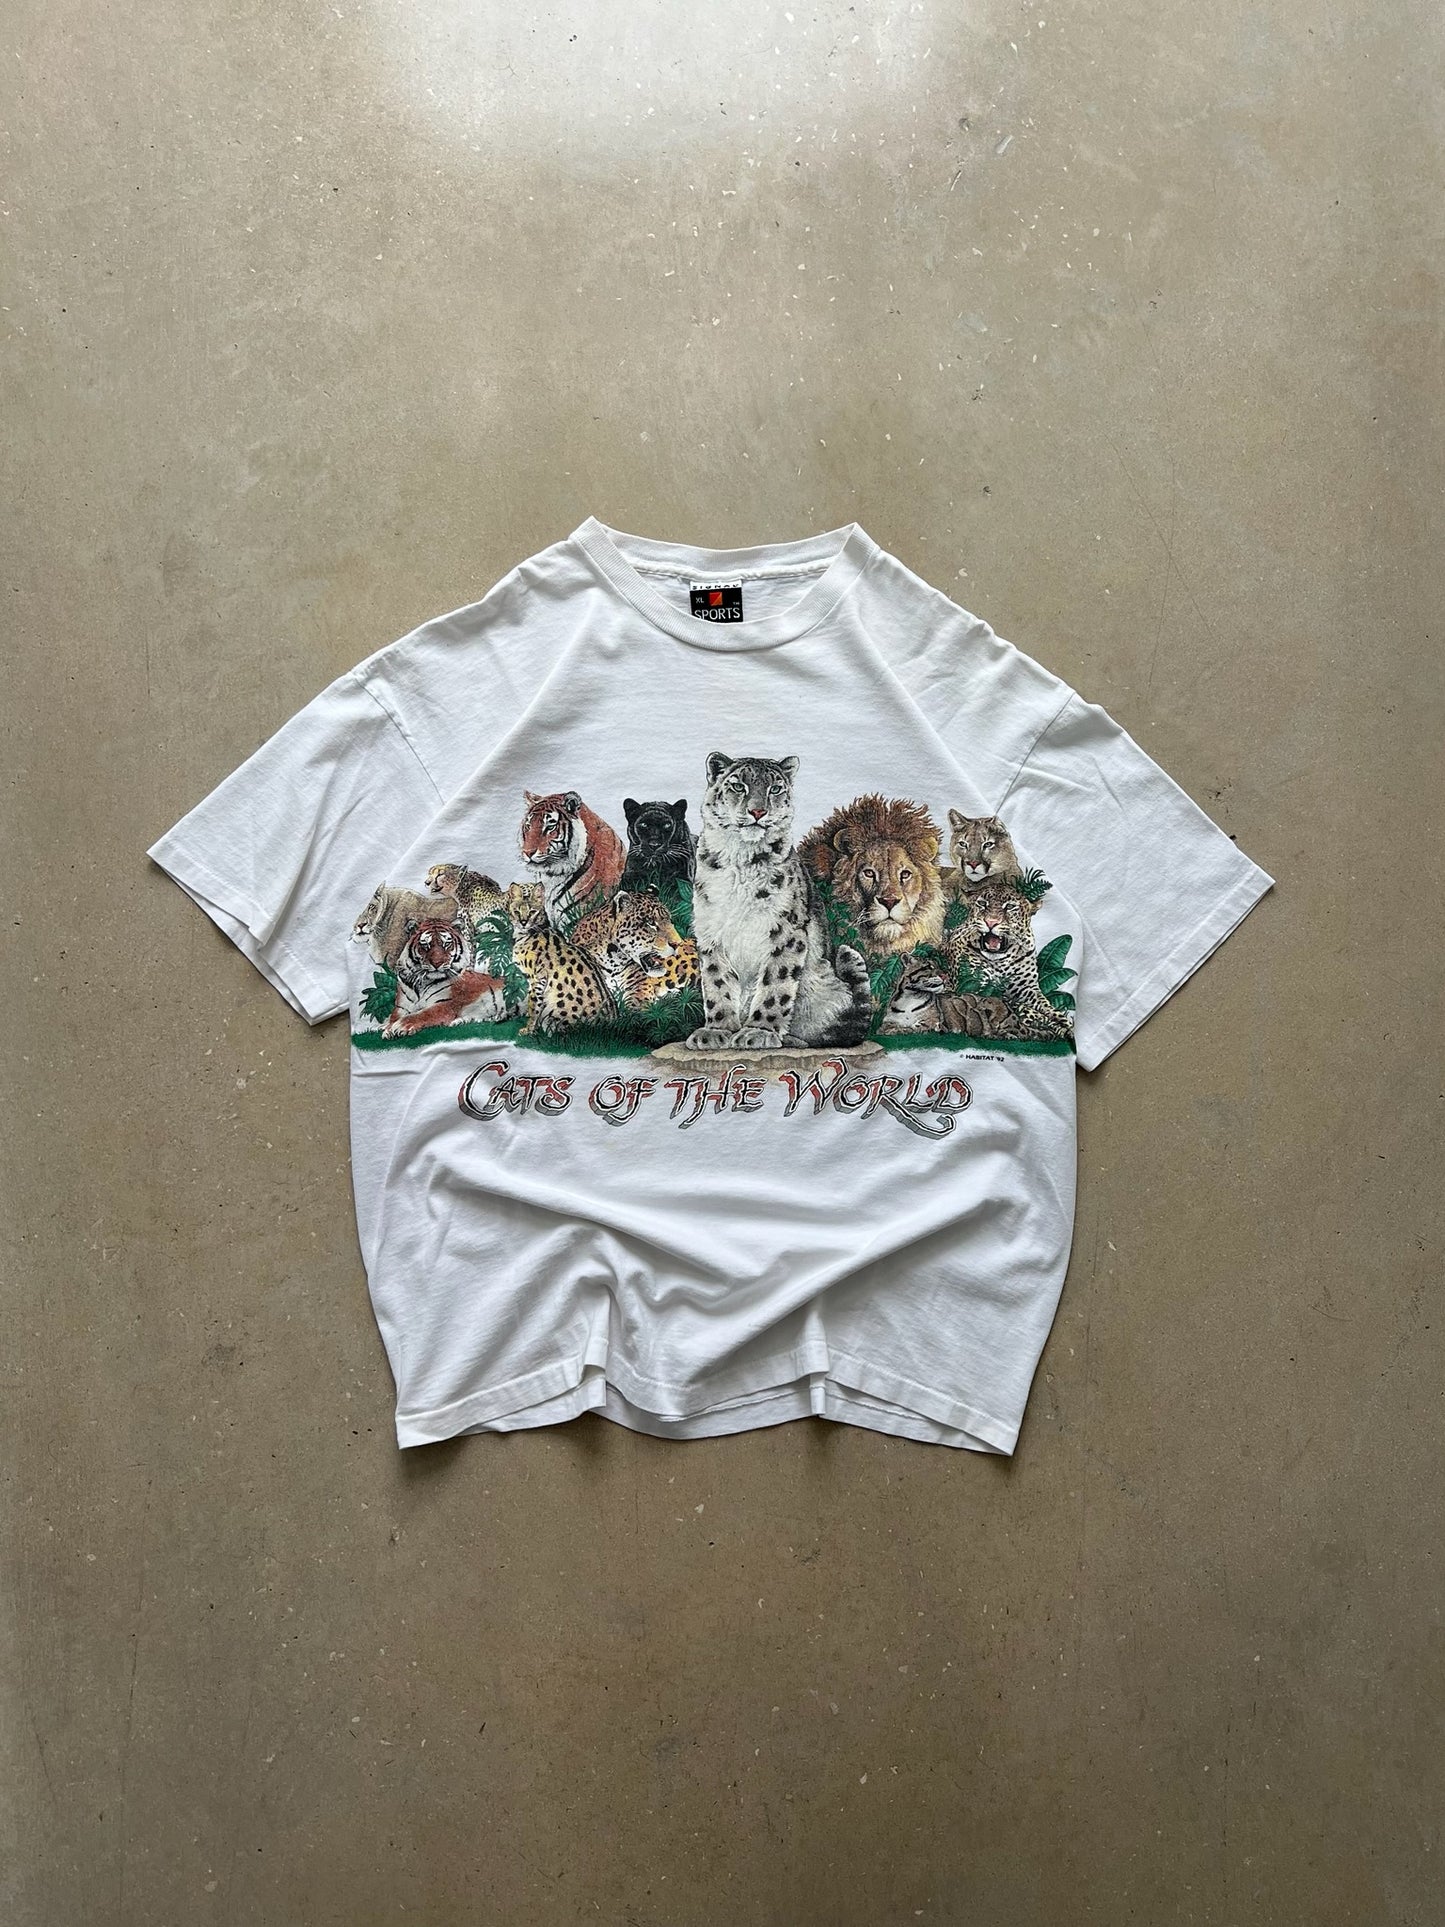 90's Cats of the World Tee XL